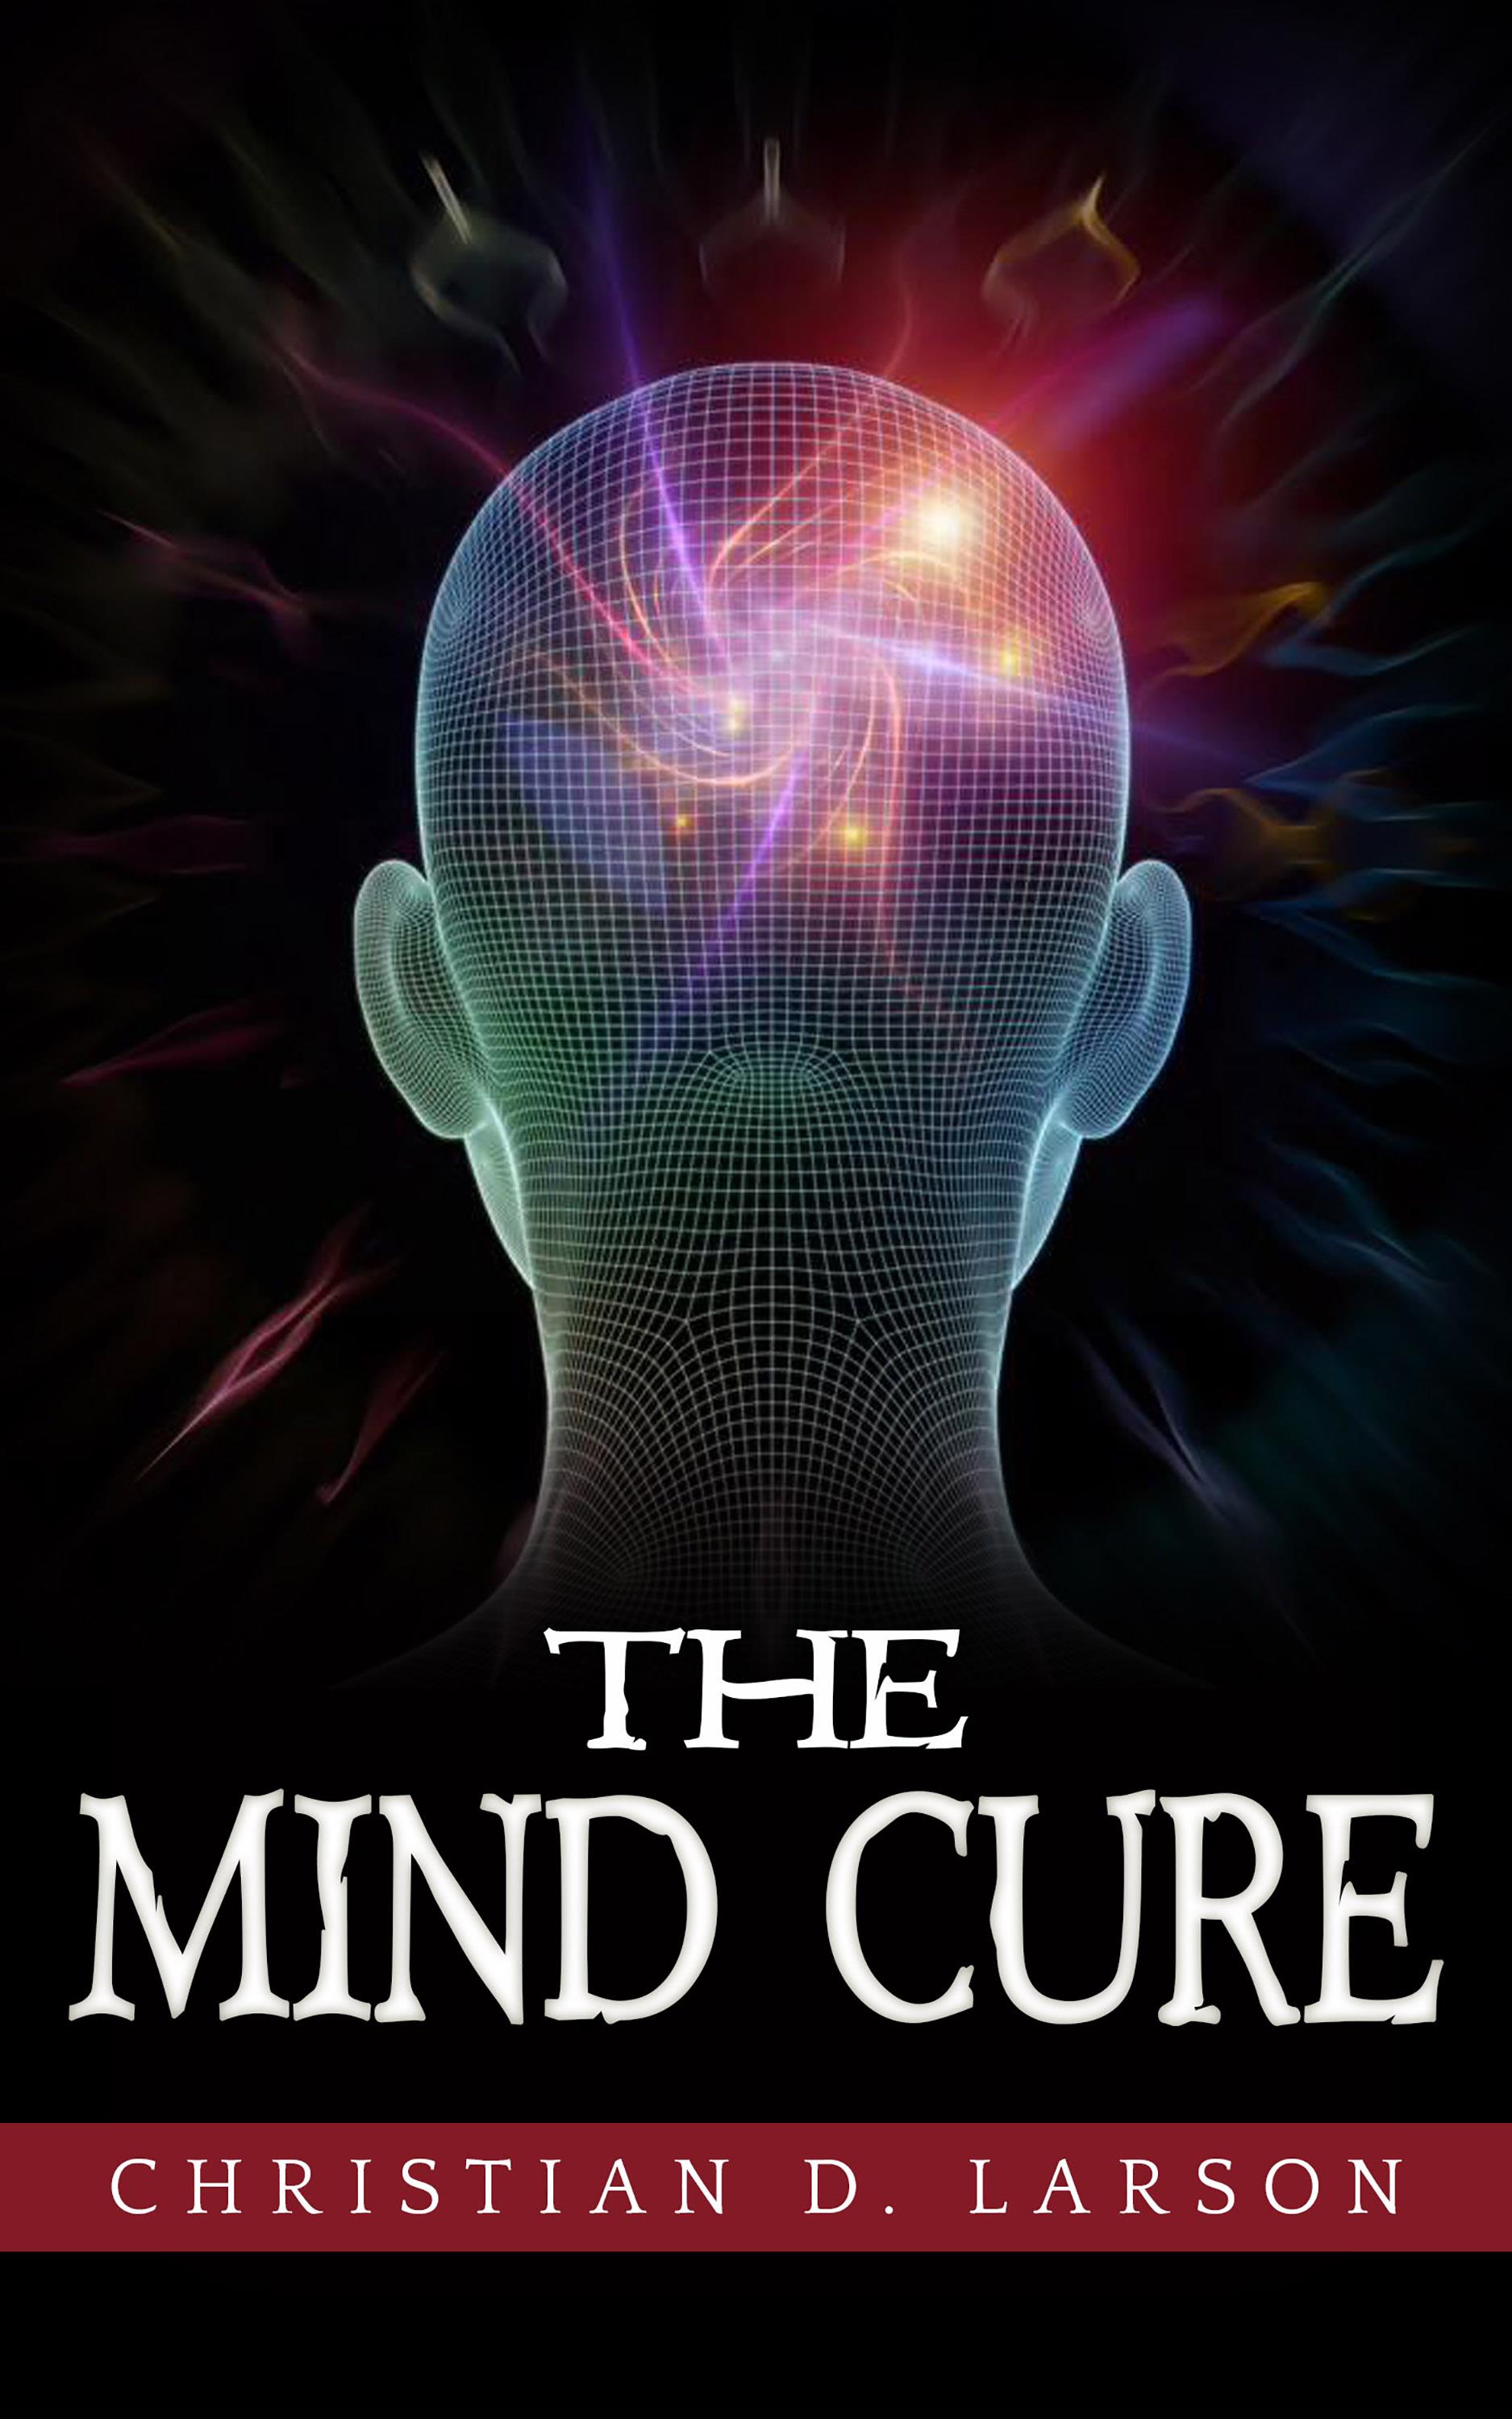 The mind cure